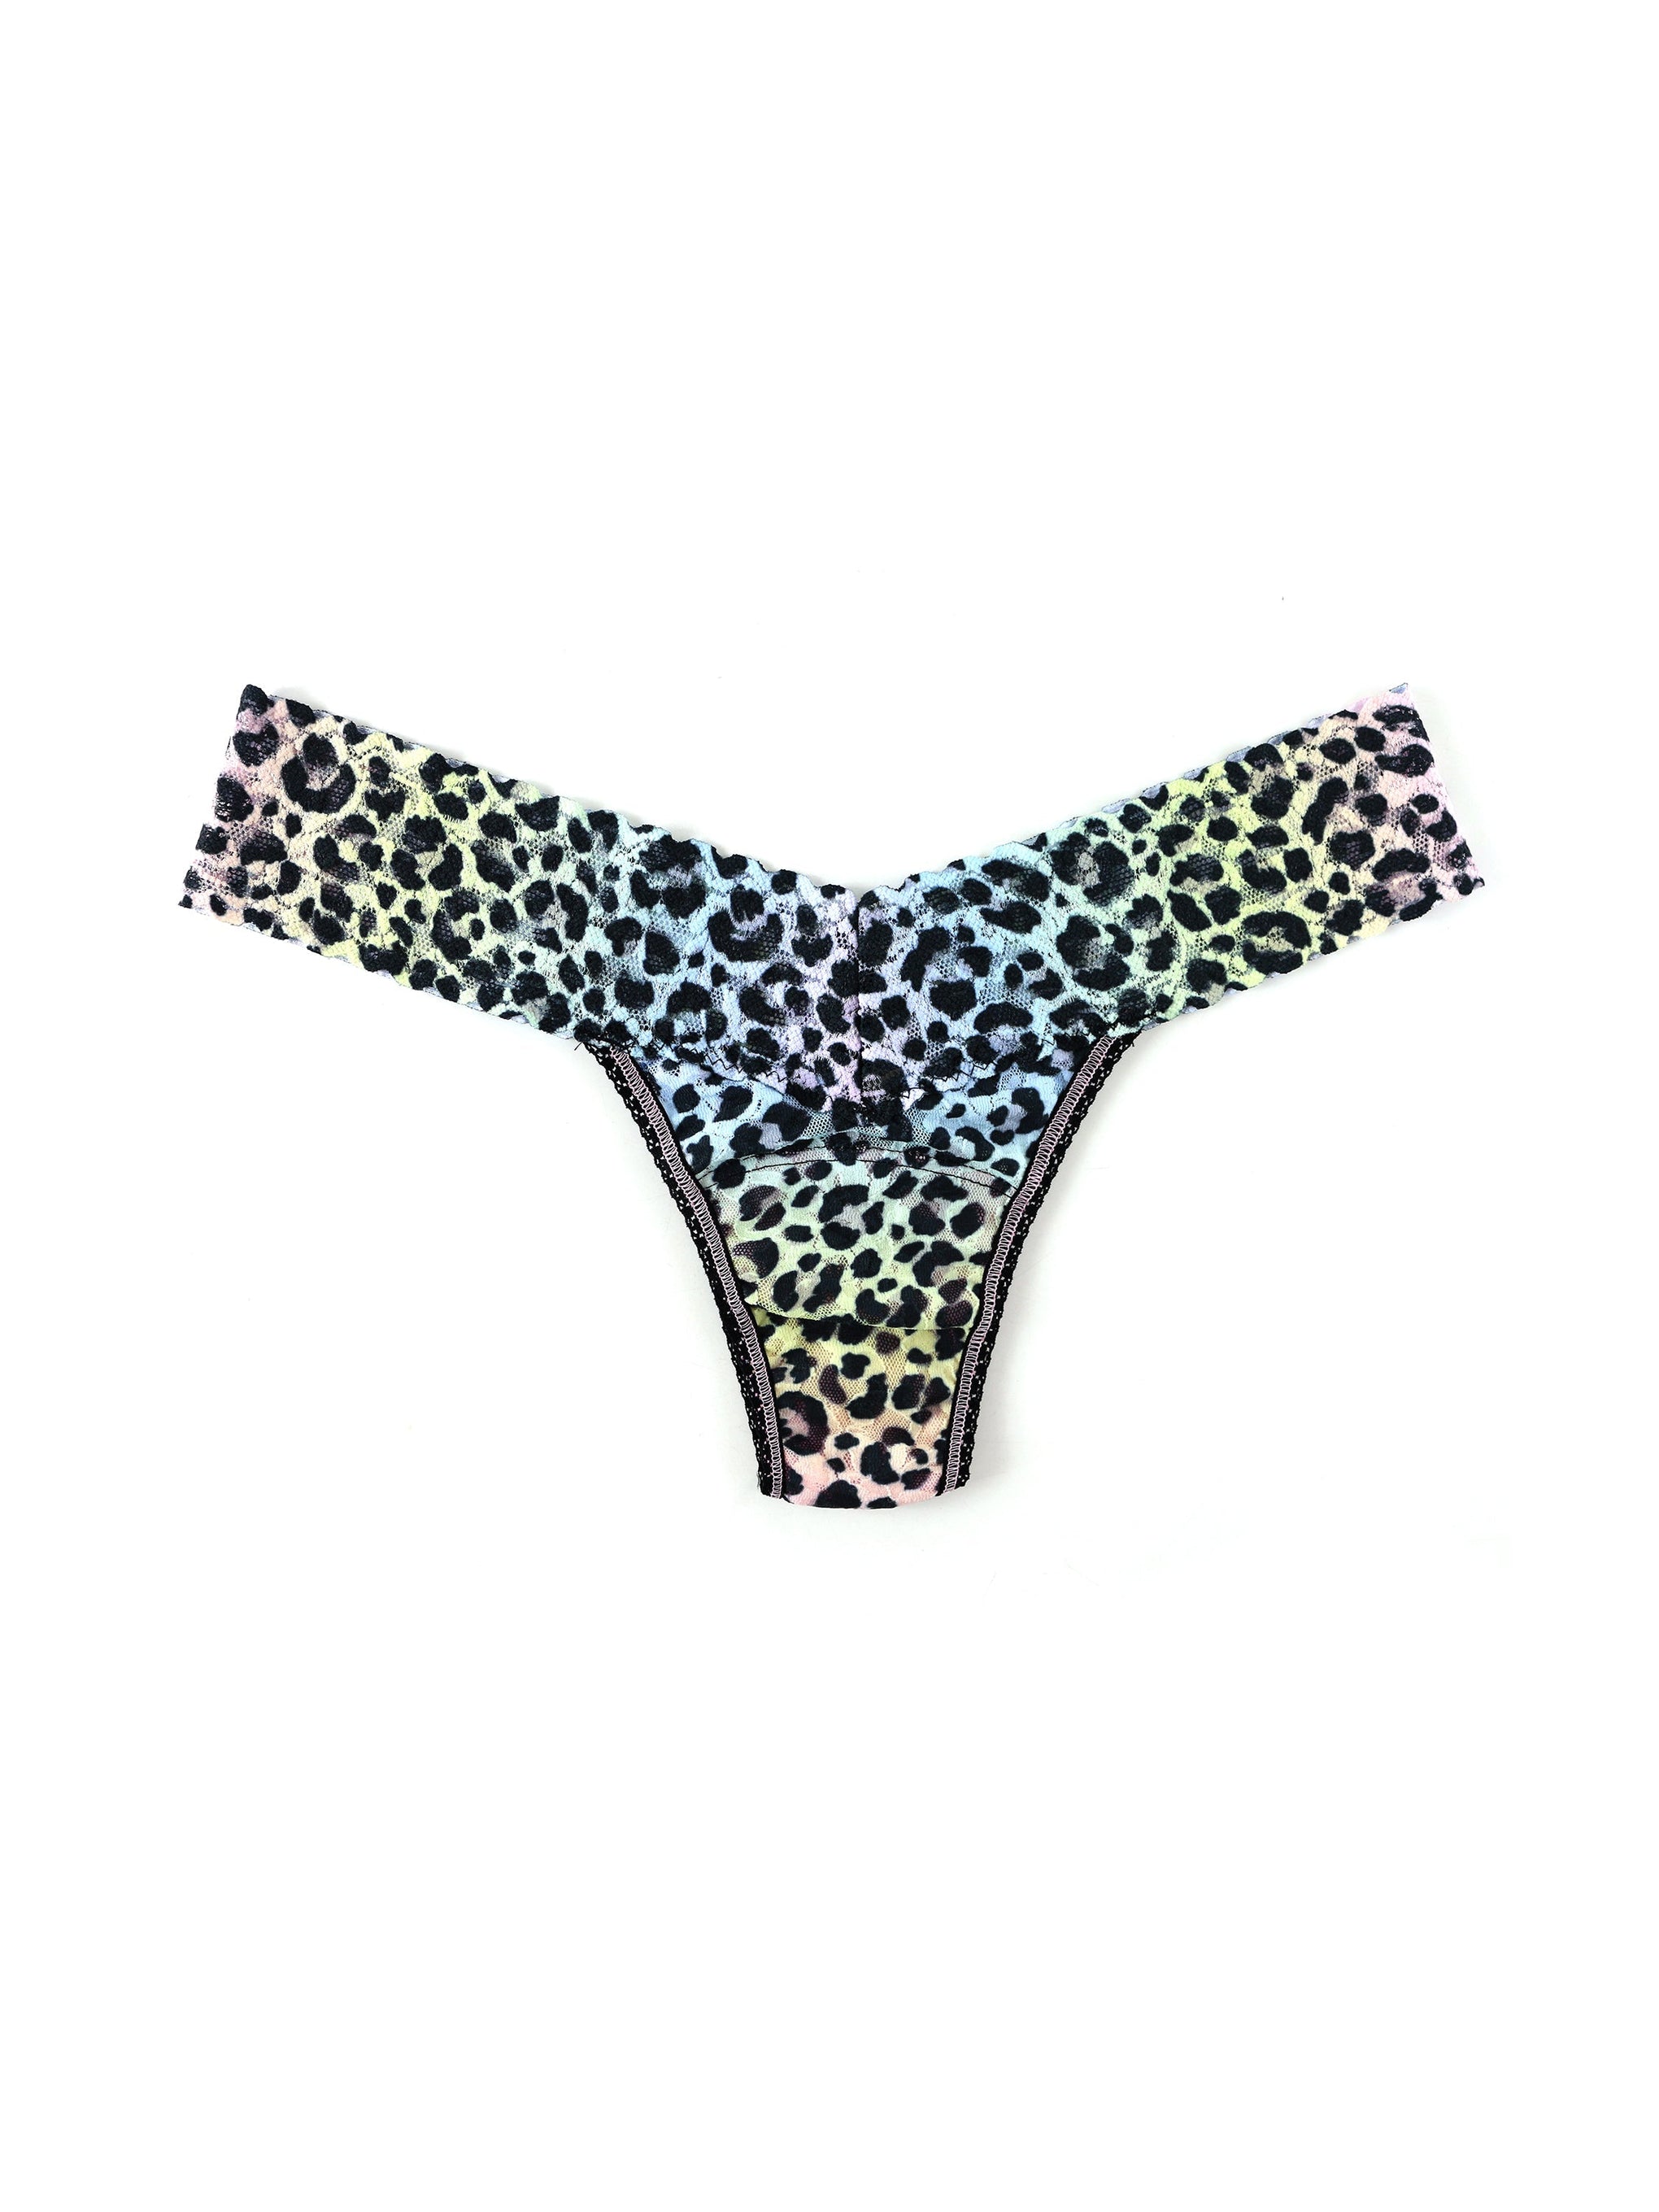 Printed Signature Lace Low Rise Thong Rainbow Leopard Sale